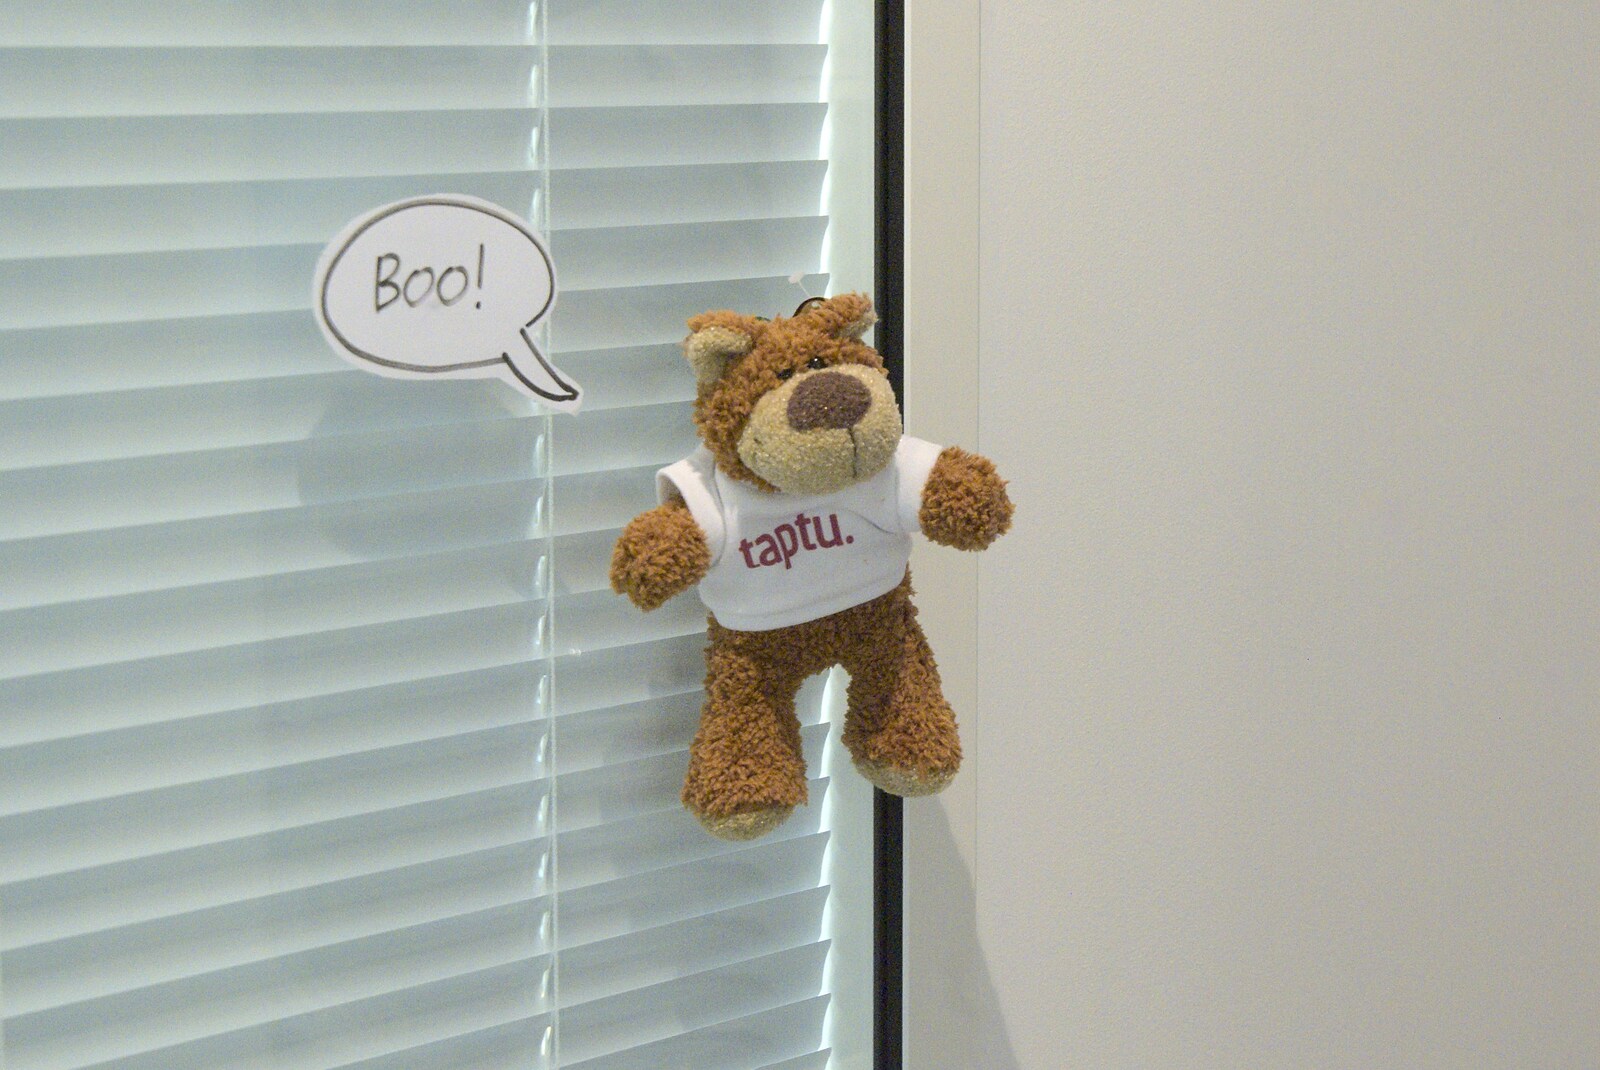 A Taptu Teddy hangs off an office window. from Ladybird Swarms, a Swiss Fondue and Cat-up-a-tree, Suffolk and Cambridge - 18th October 2009